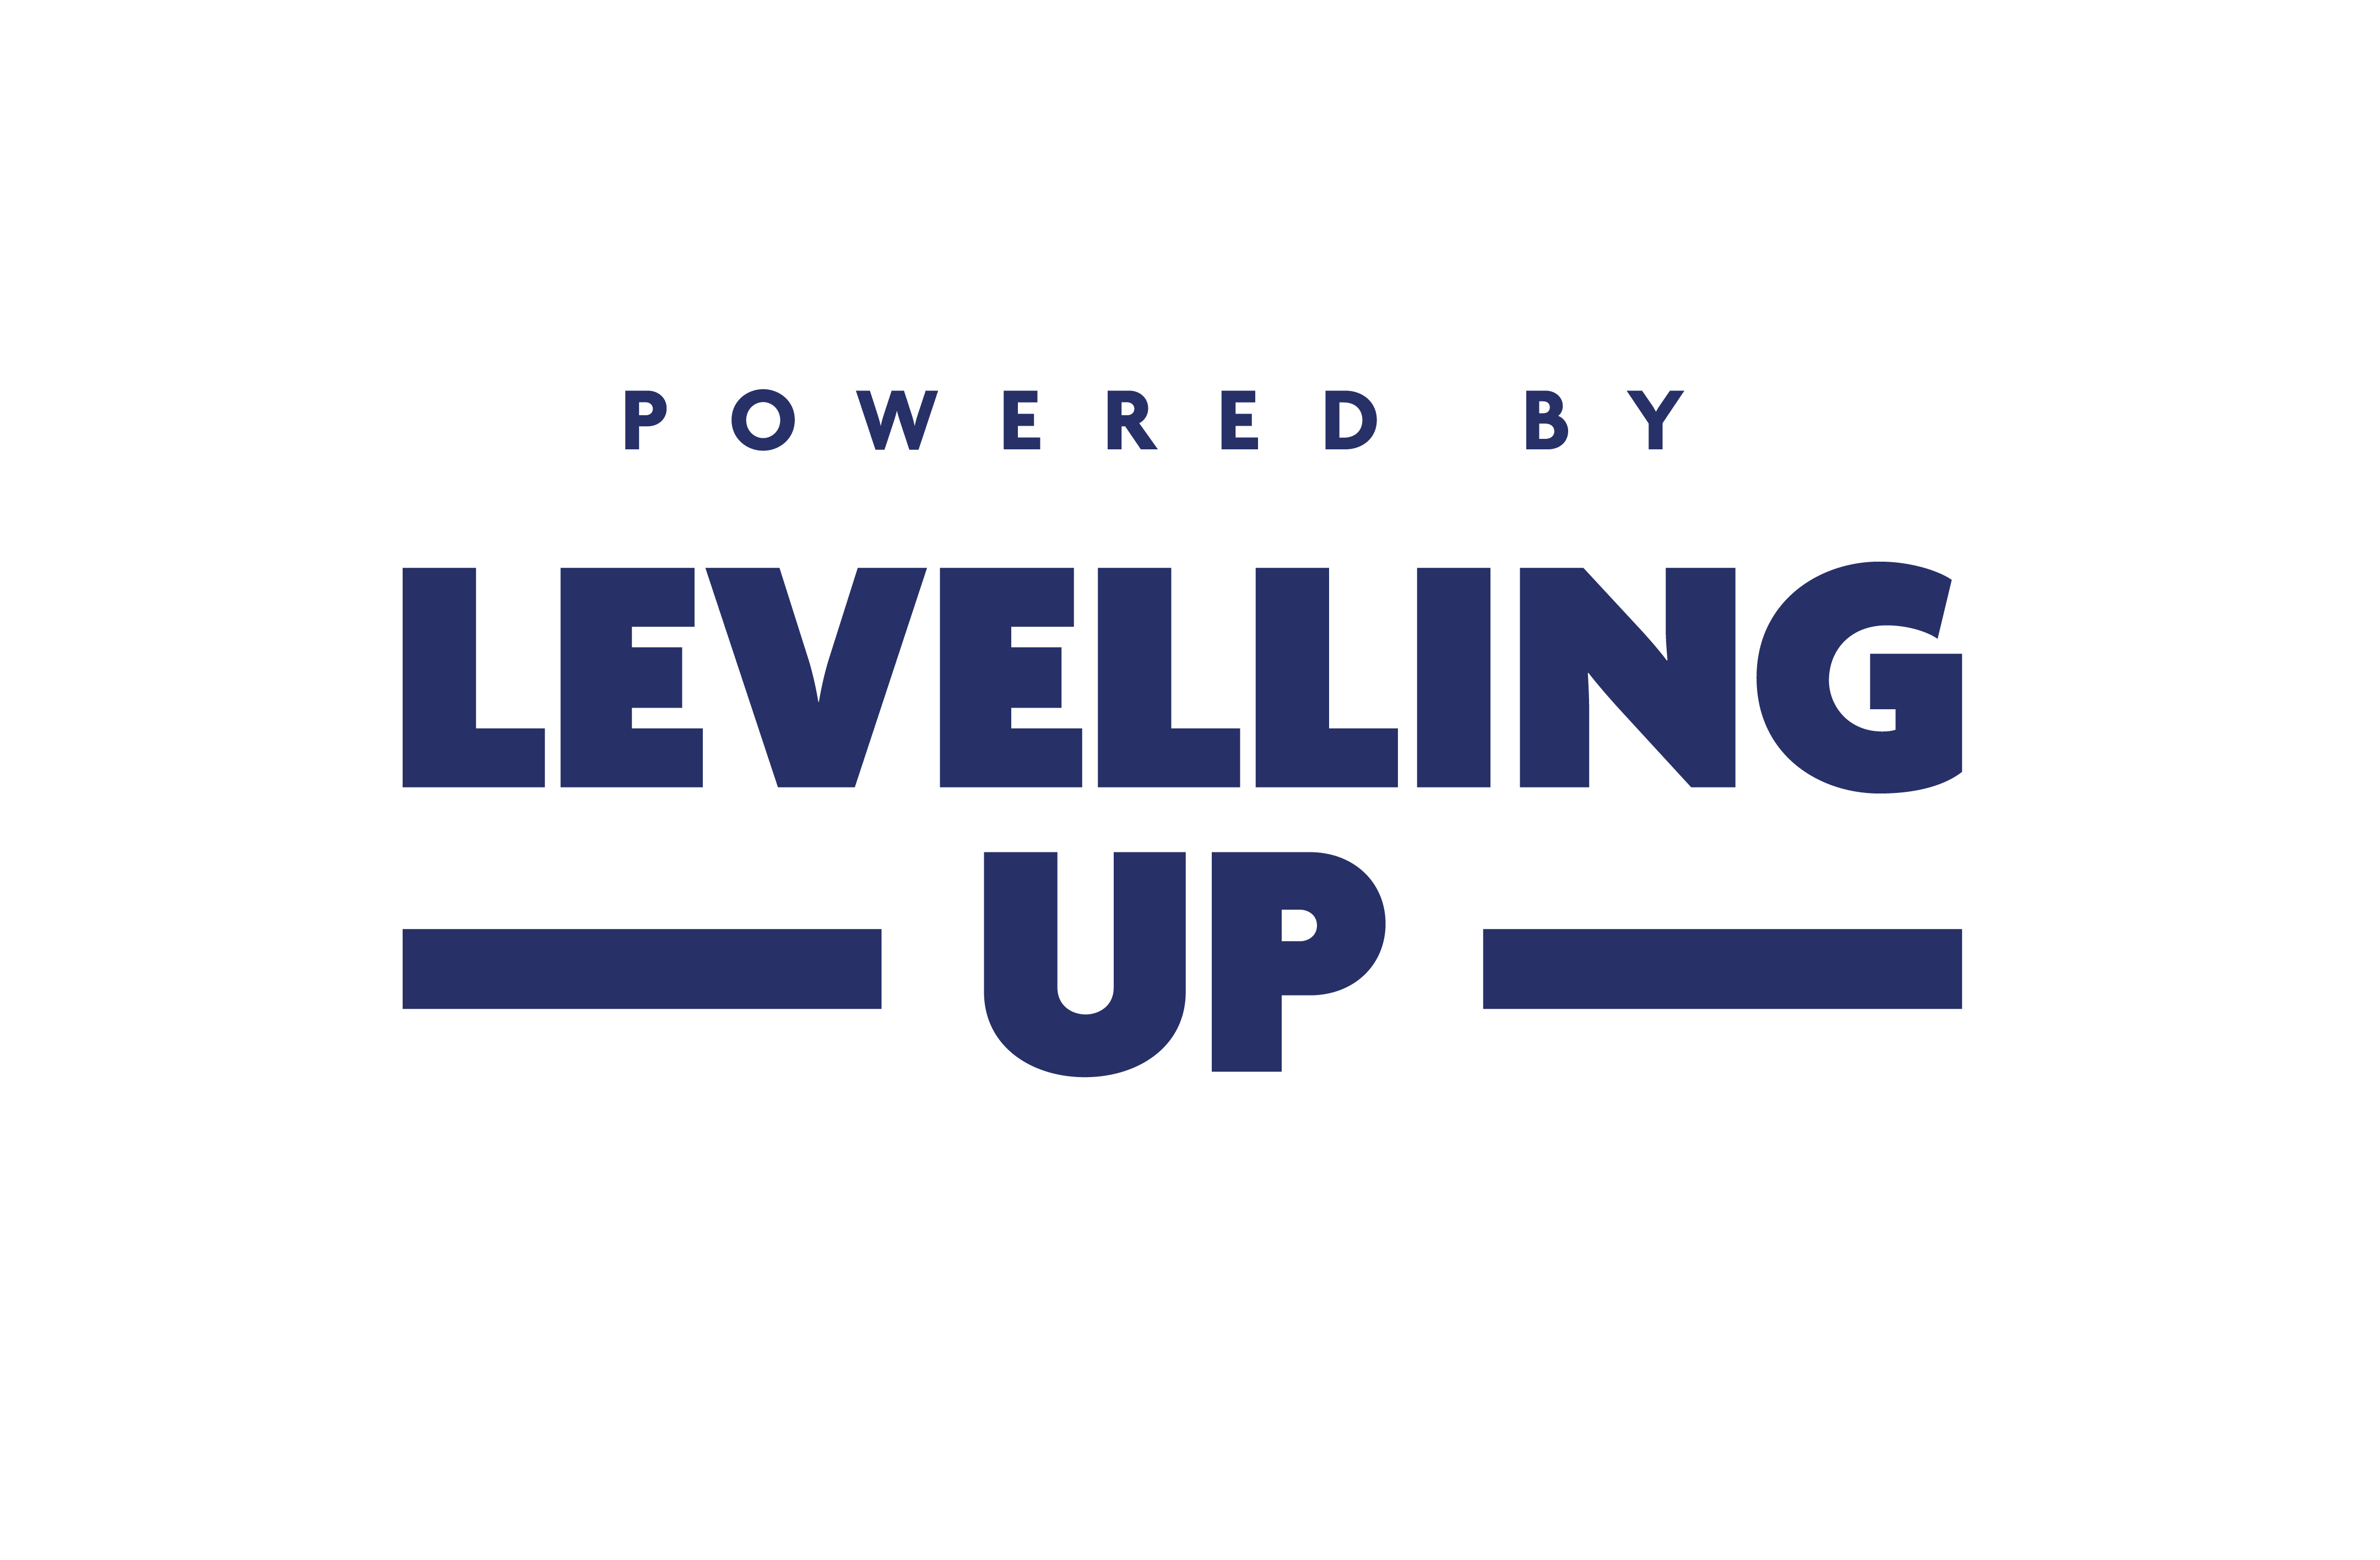 Powered by Levelling Up logo, in English